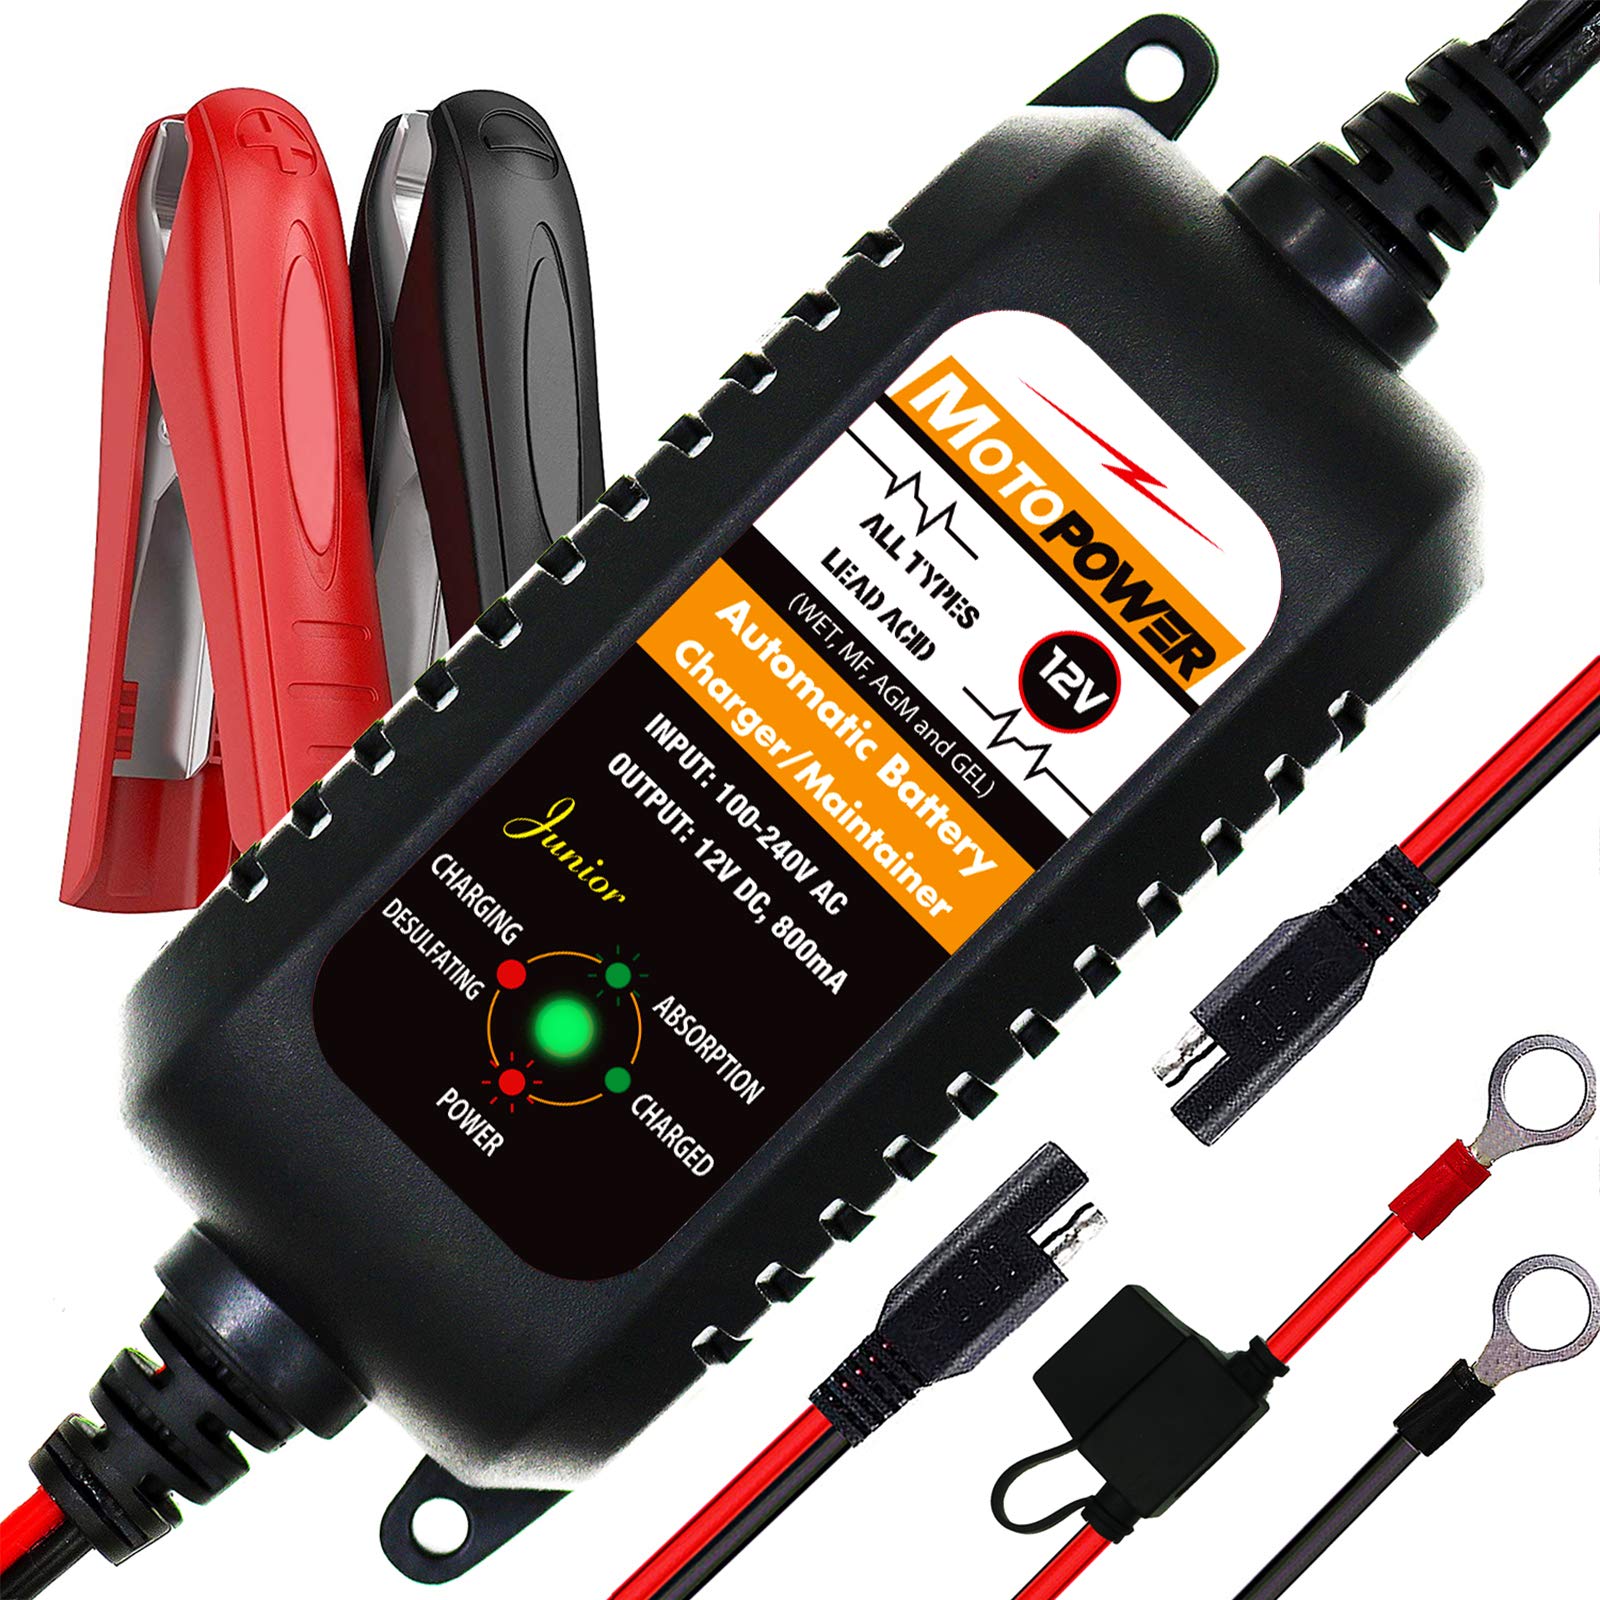 MOTOPOWER MP00205A 12V 800mA Automatic Battery Charger, Battery Maintainer, Trickle Charger, and Battery Desulfator at Amazon